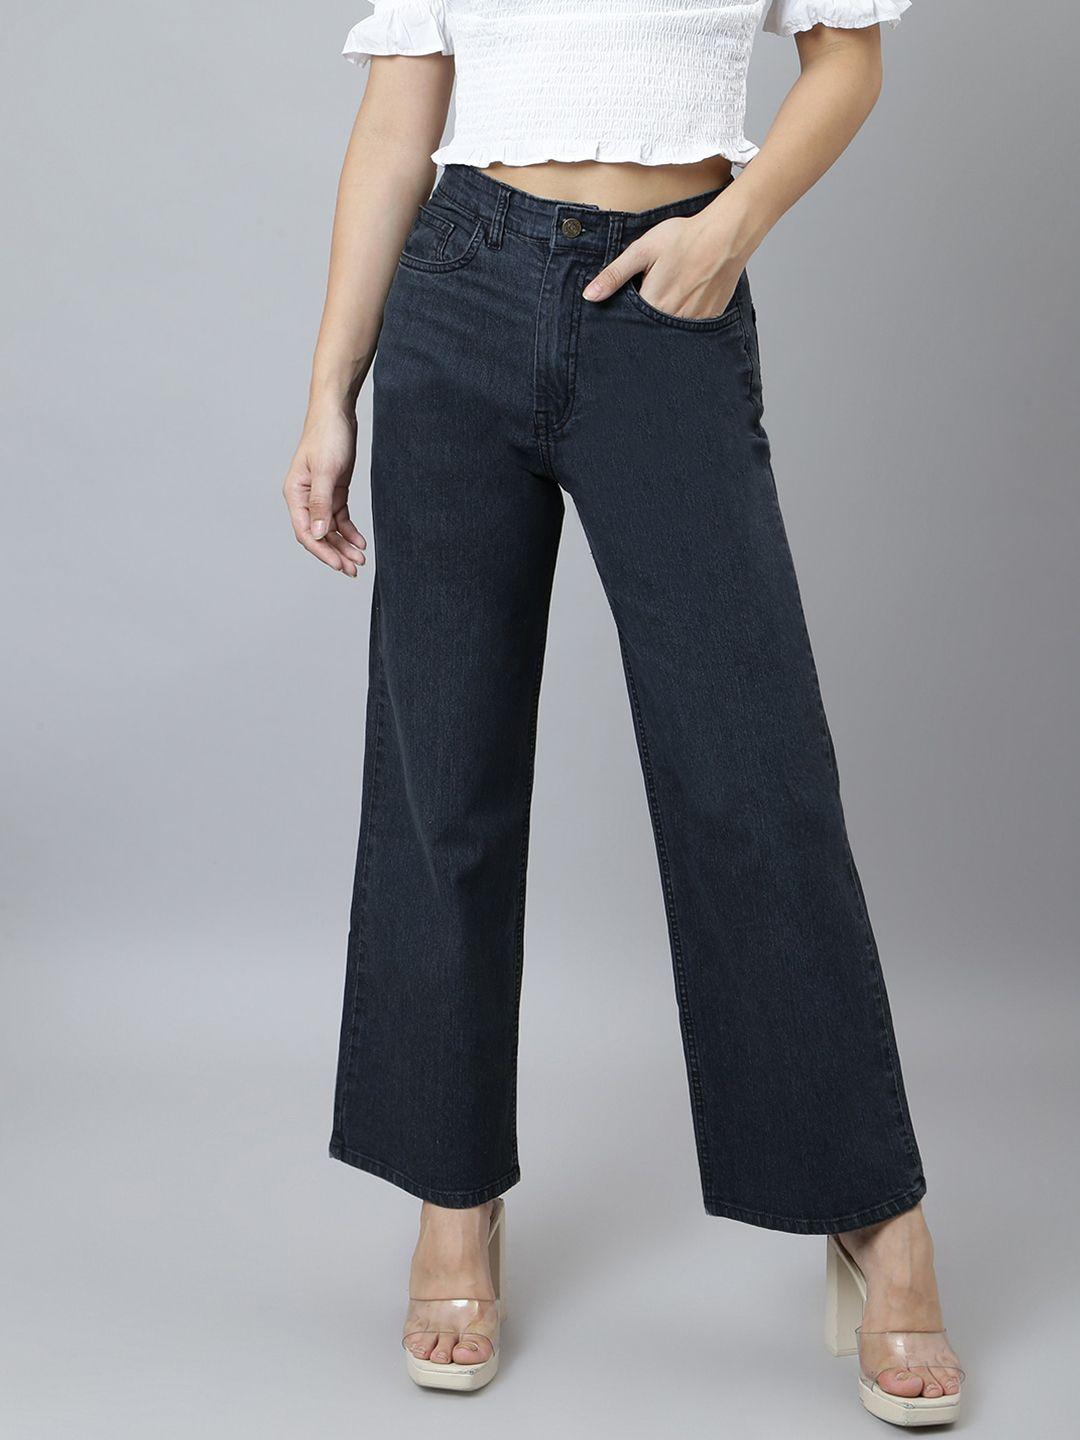 guti-women-flared-high-rise-stretchable-cotton-jeans